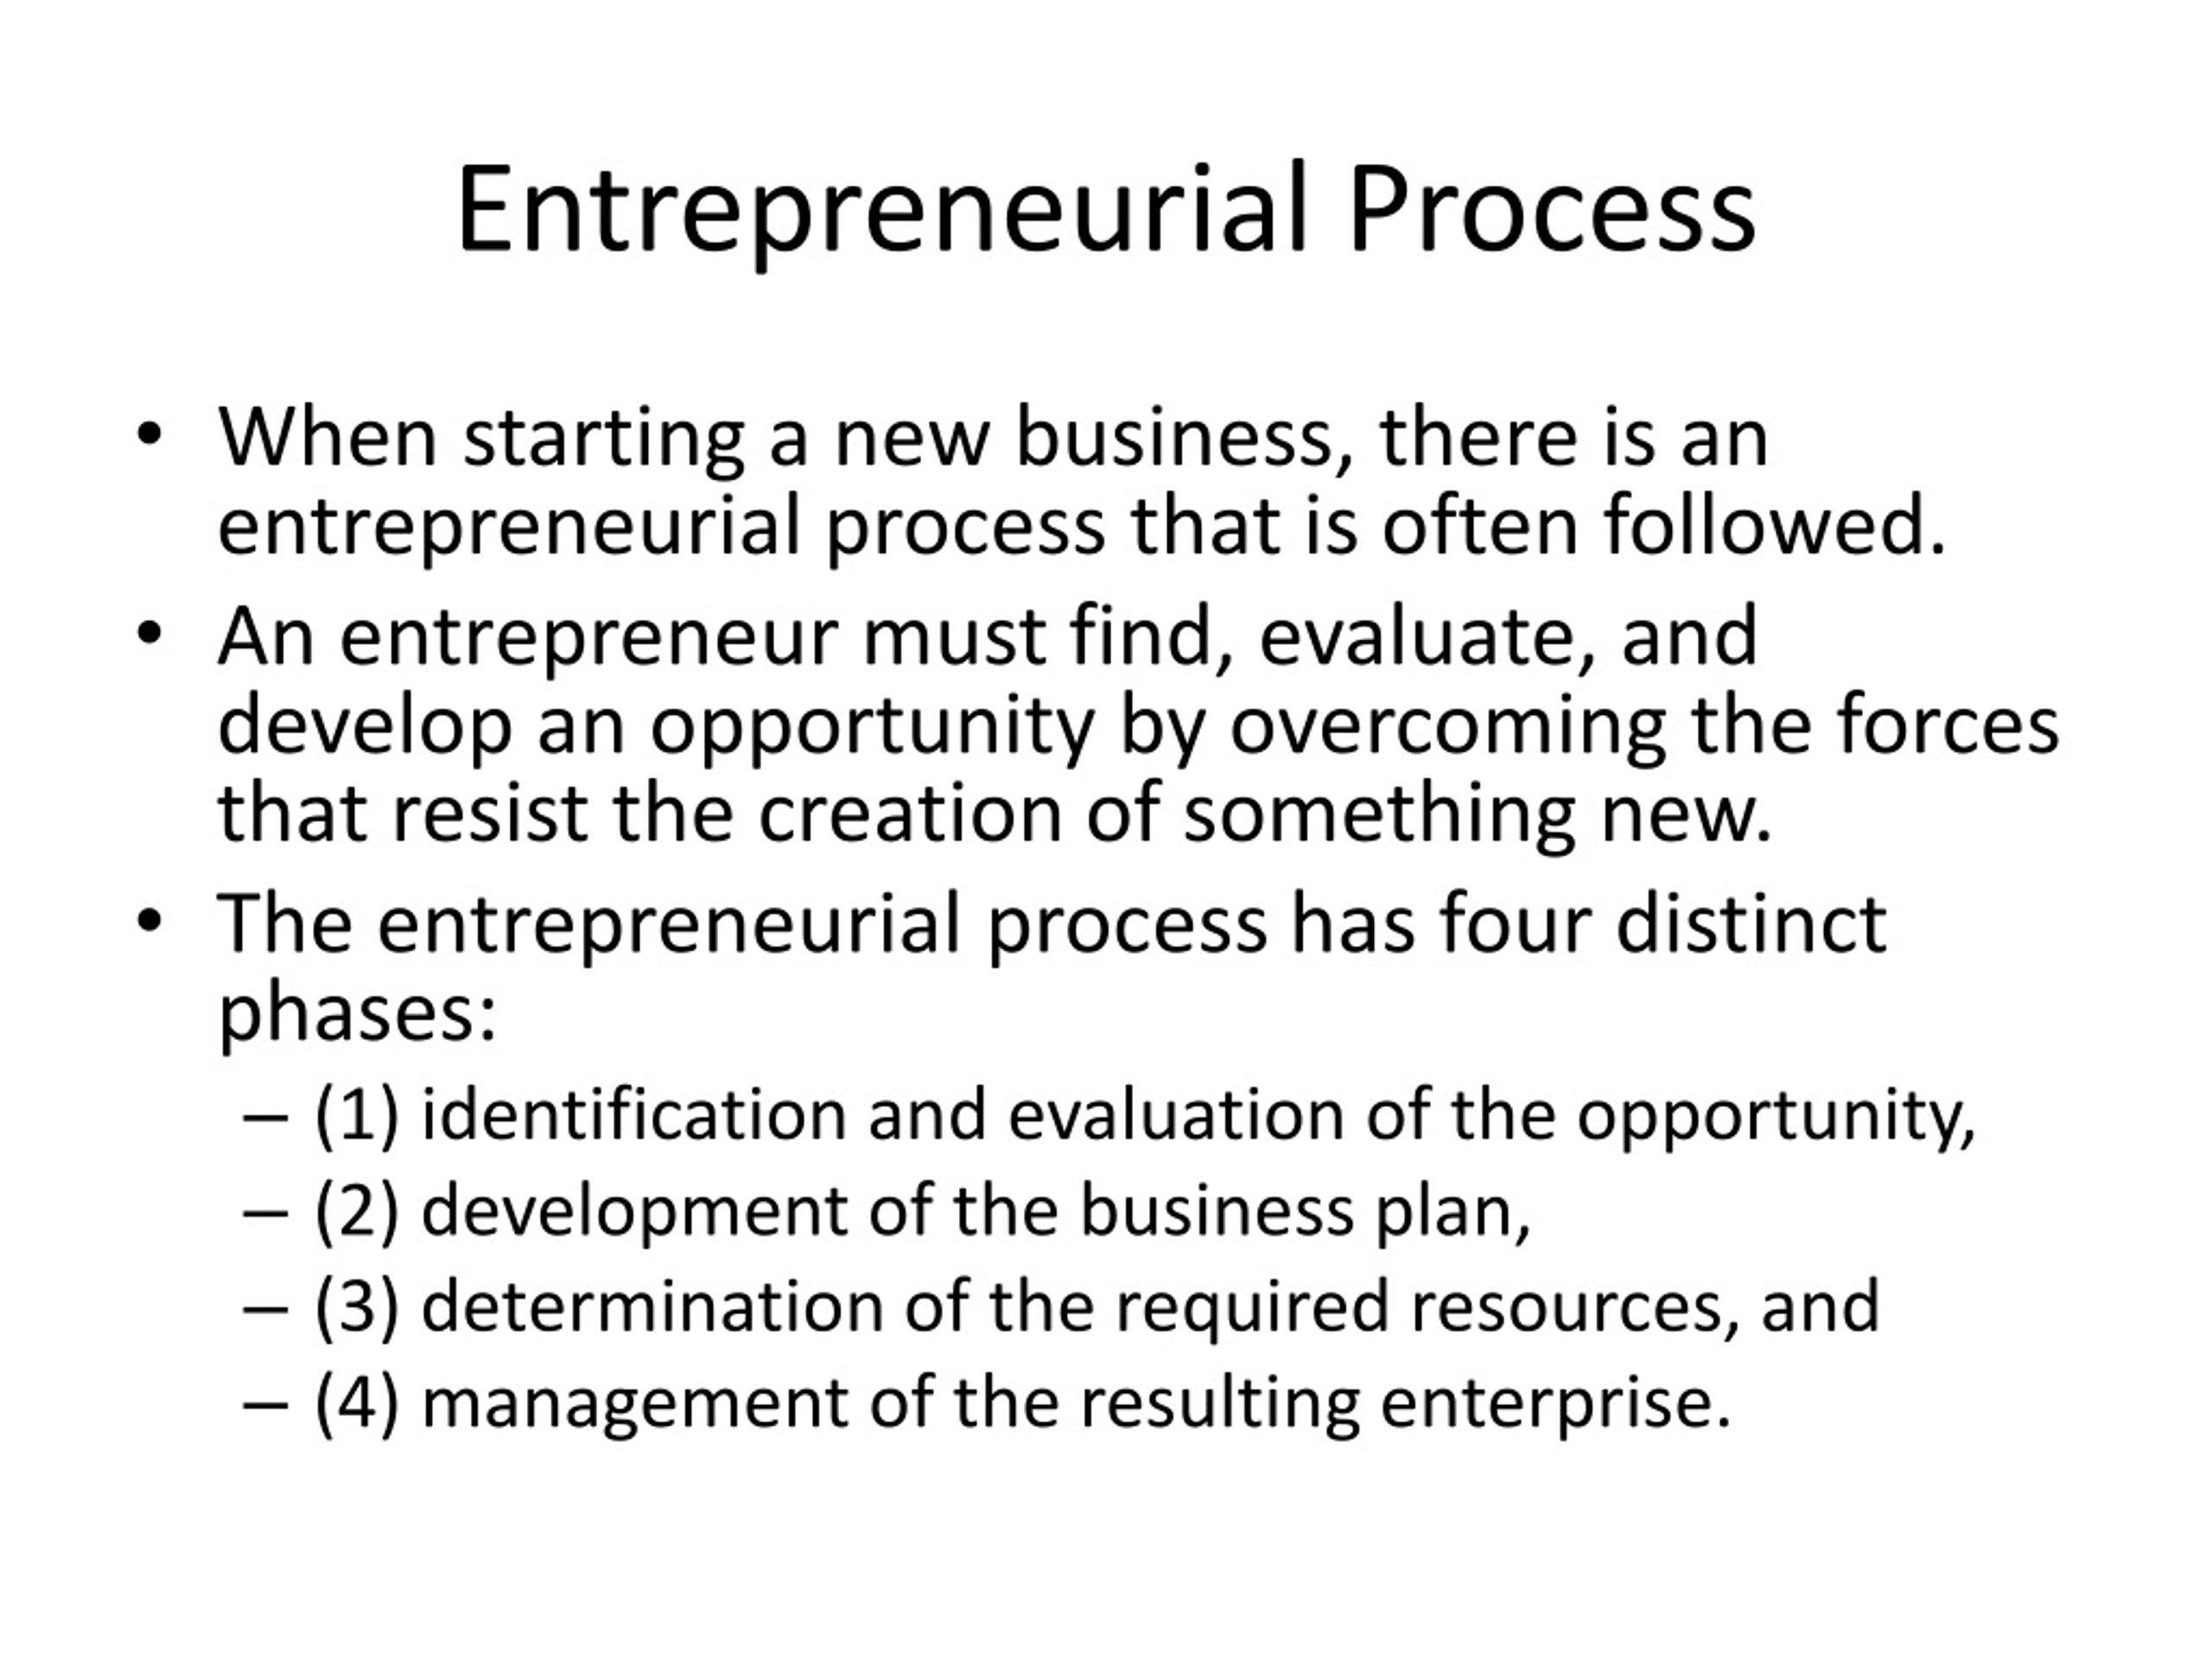 what is entrepreneurial management essay